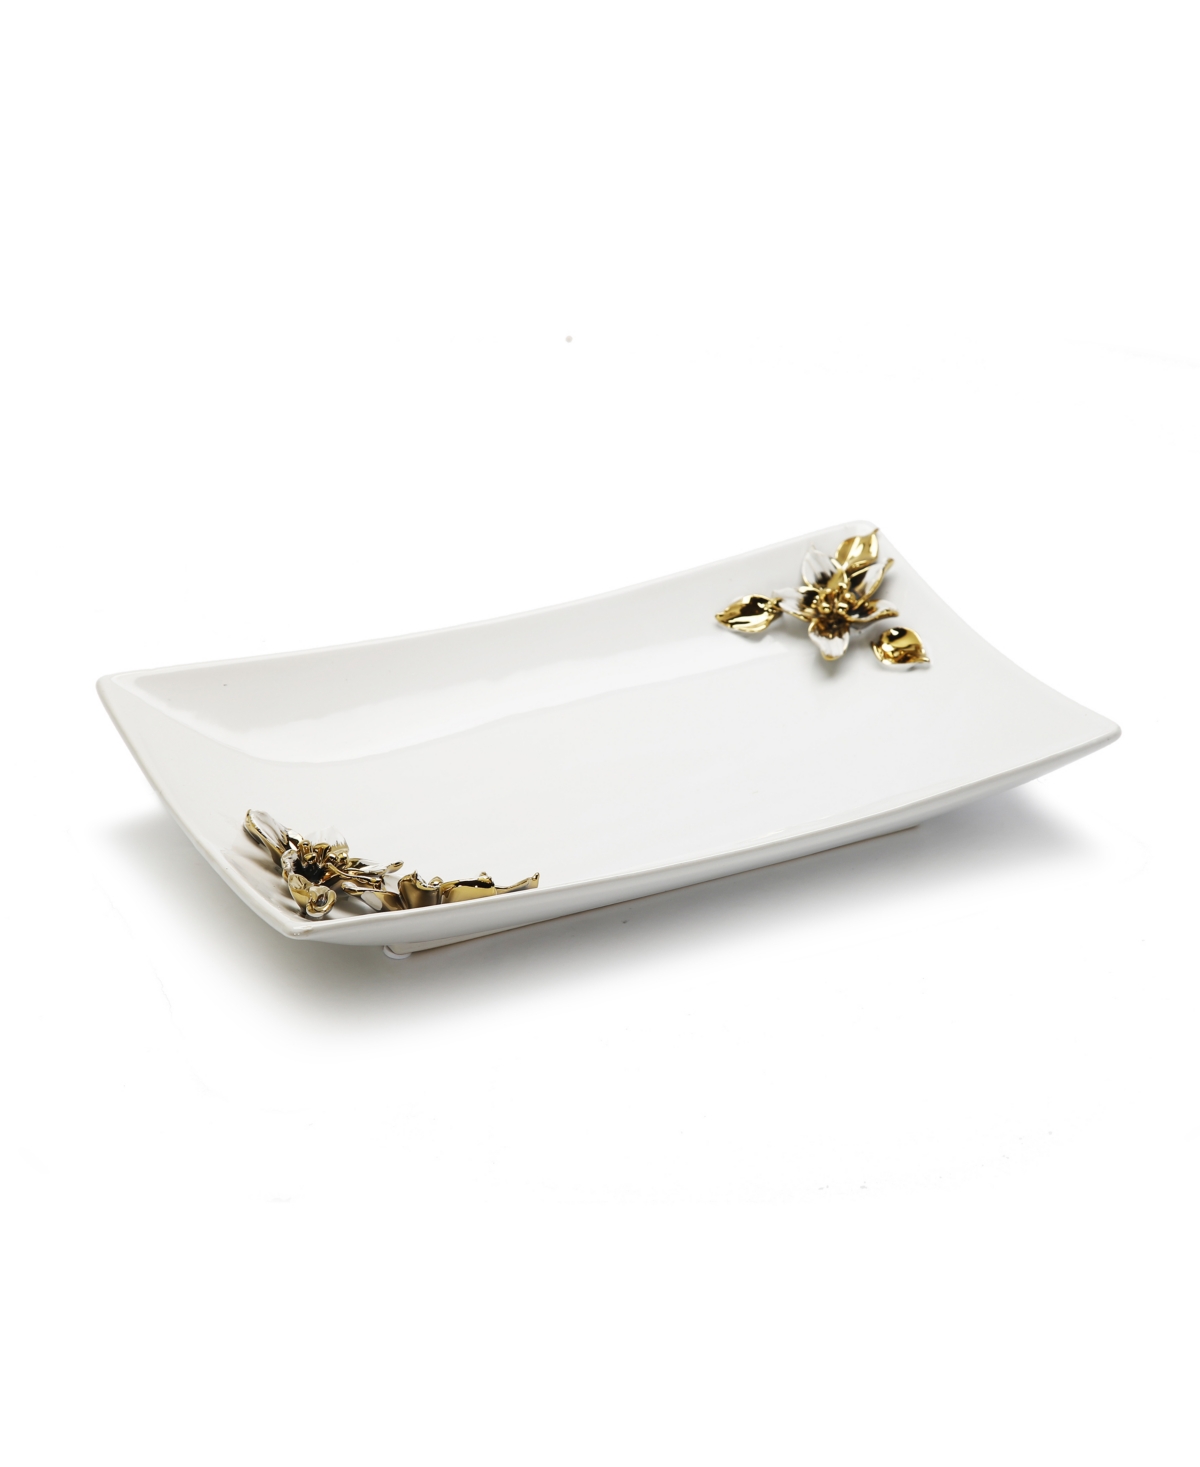 VIVIENCE PORCELAIN TRAY WITH GOLD-TONE AND WHITE FLOWER ON HANDLES